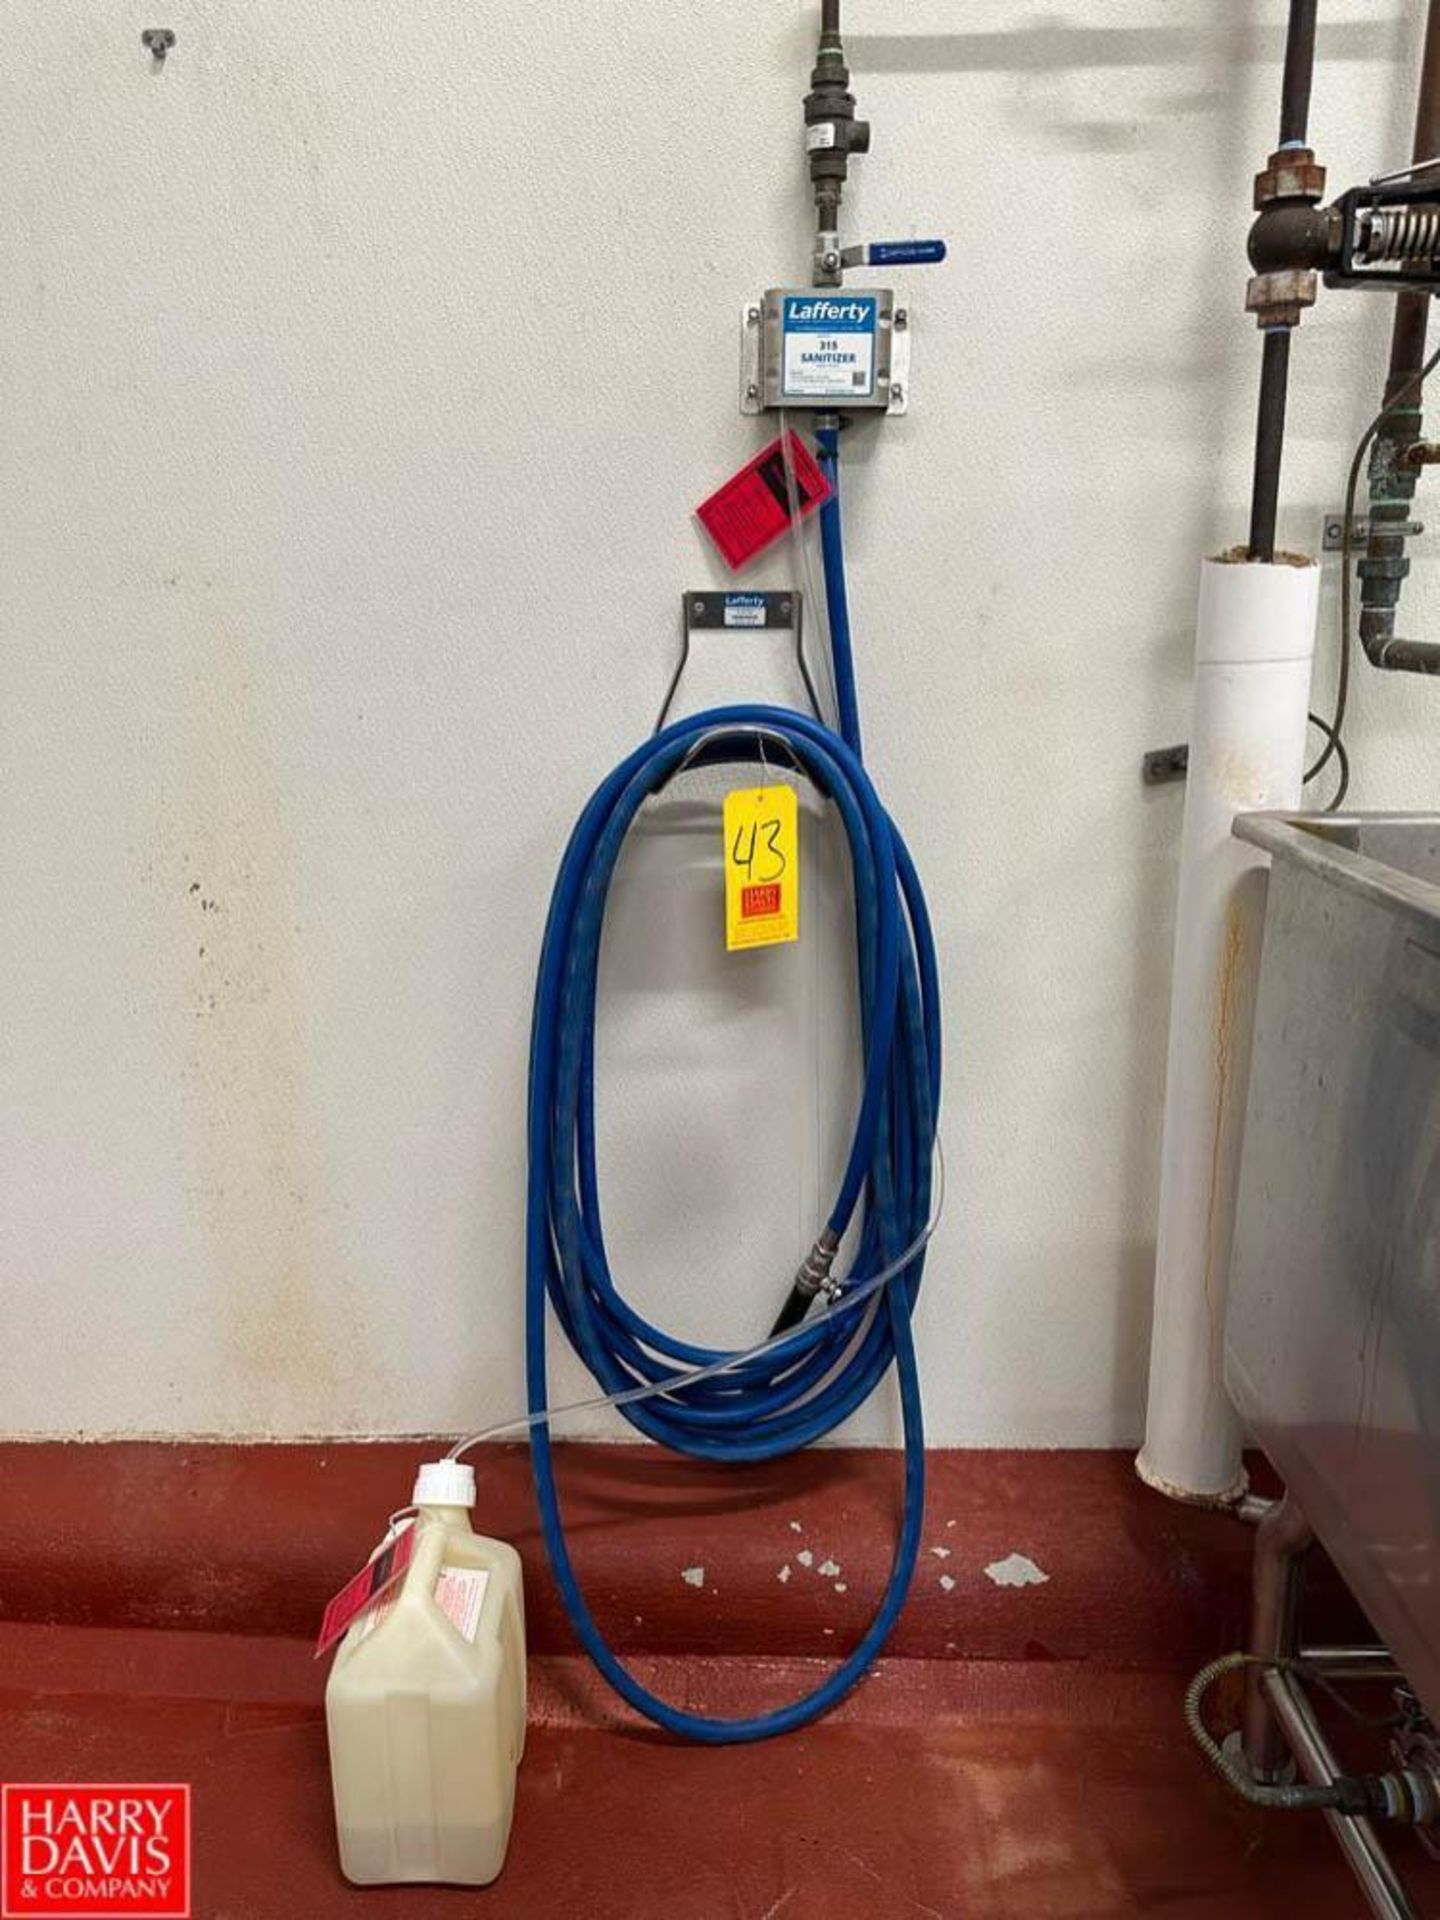 Lafferty Sanitizing Foamer with Hose and Nozzle - Rigging Fee: $100